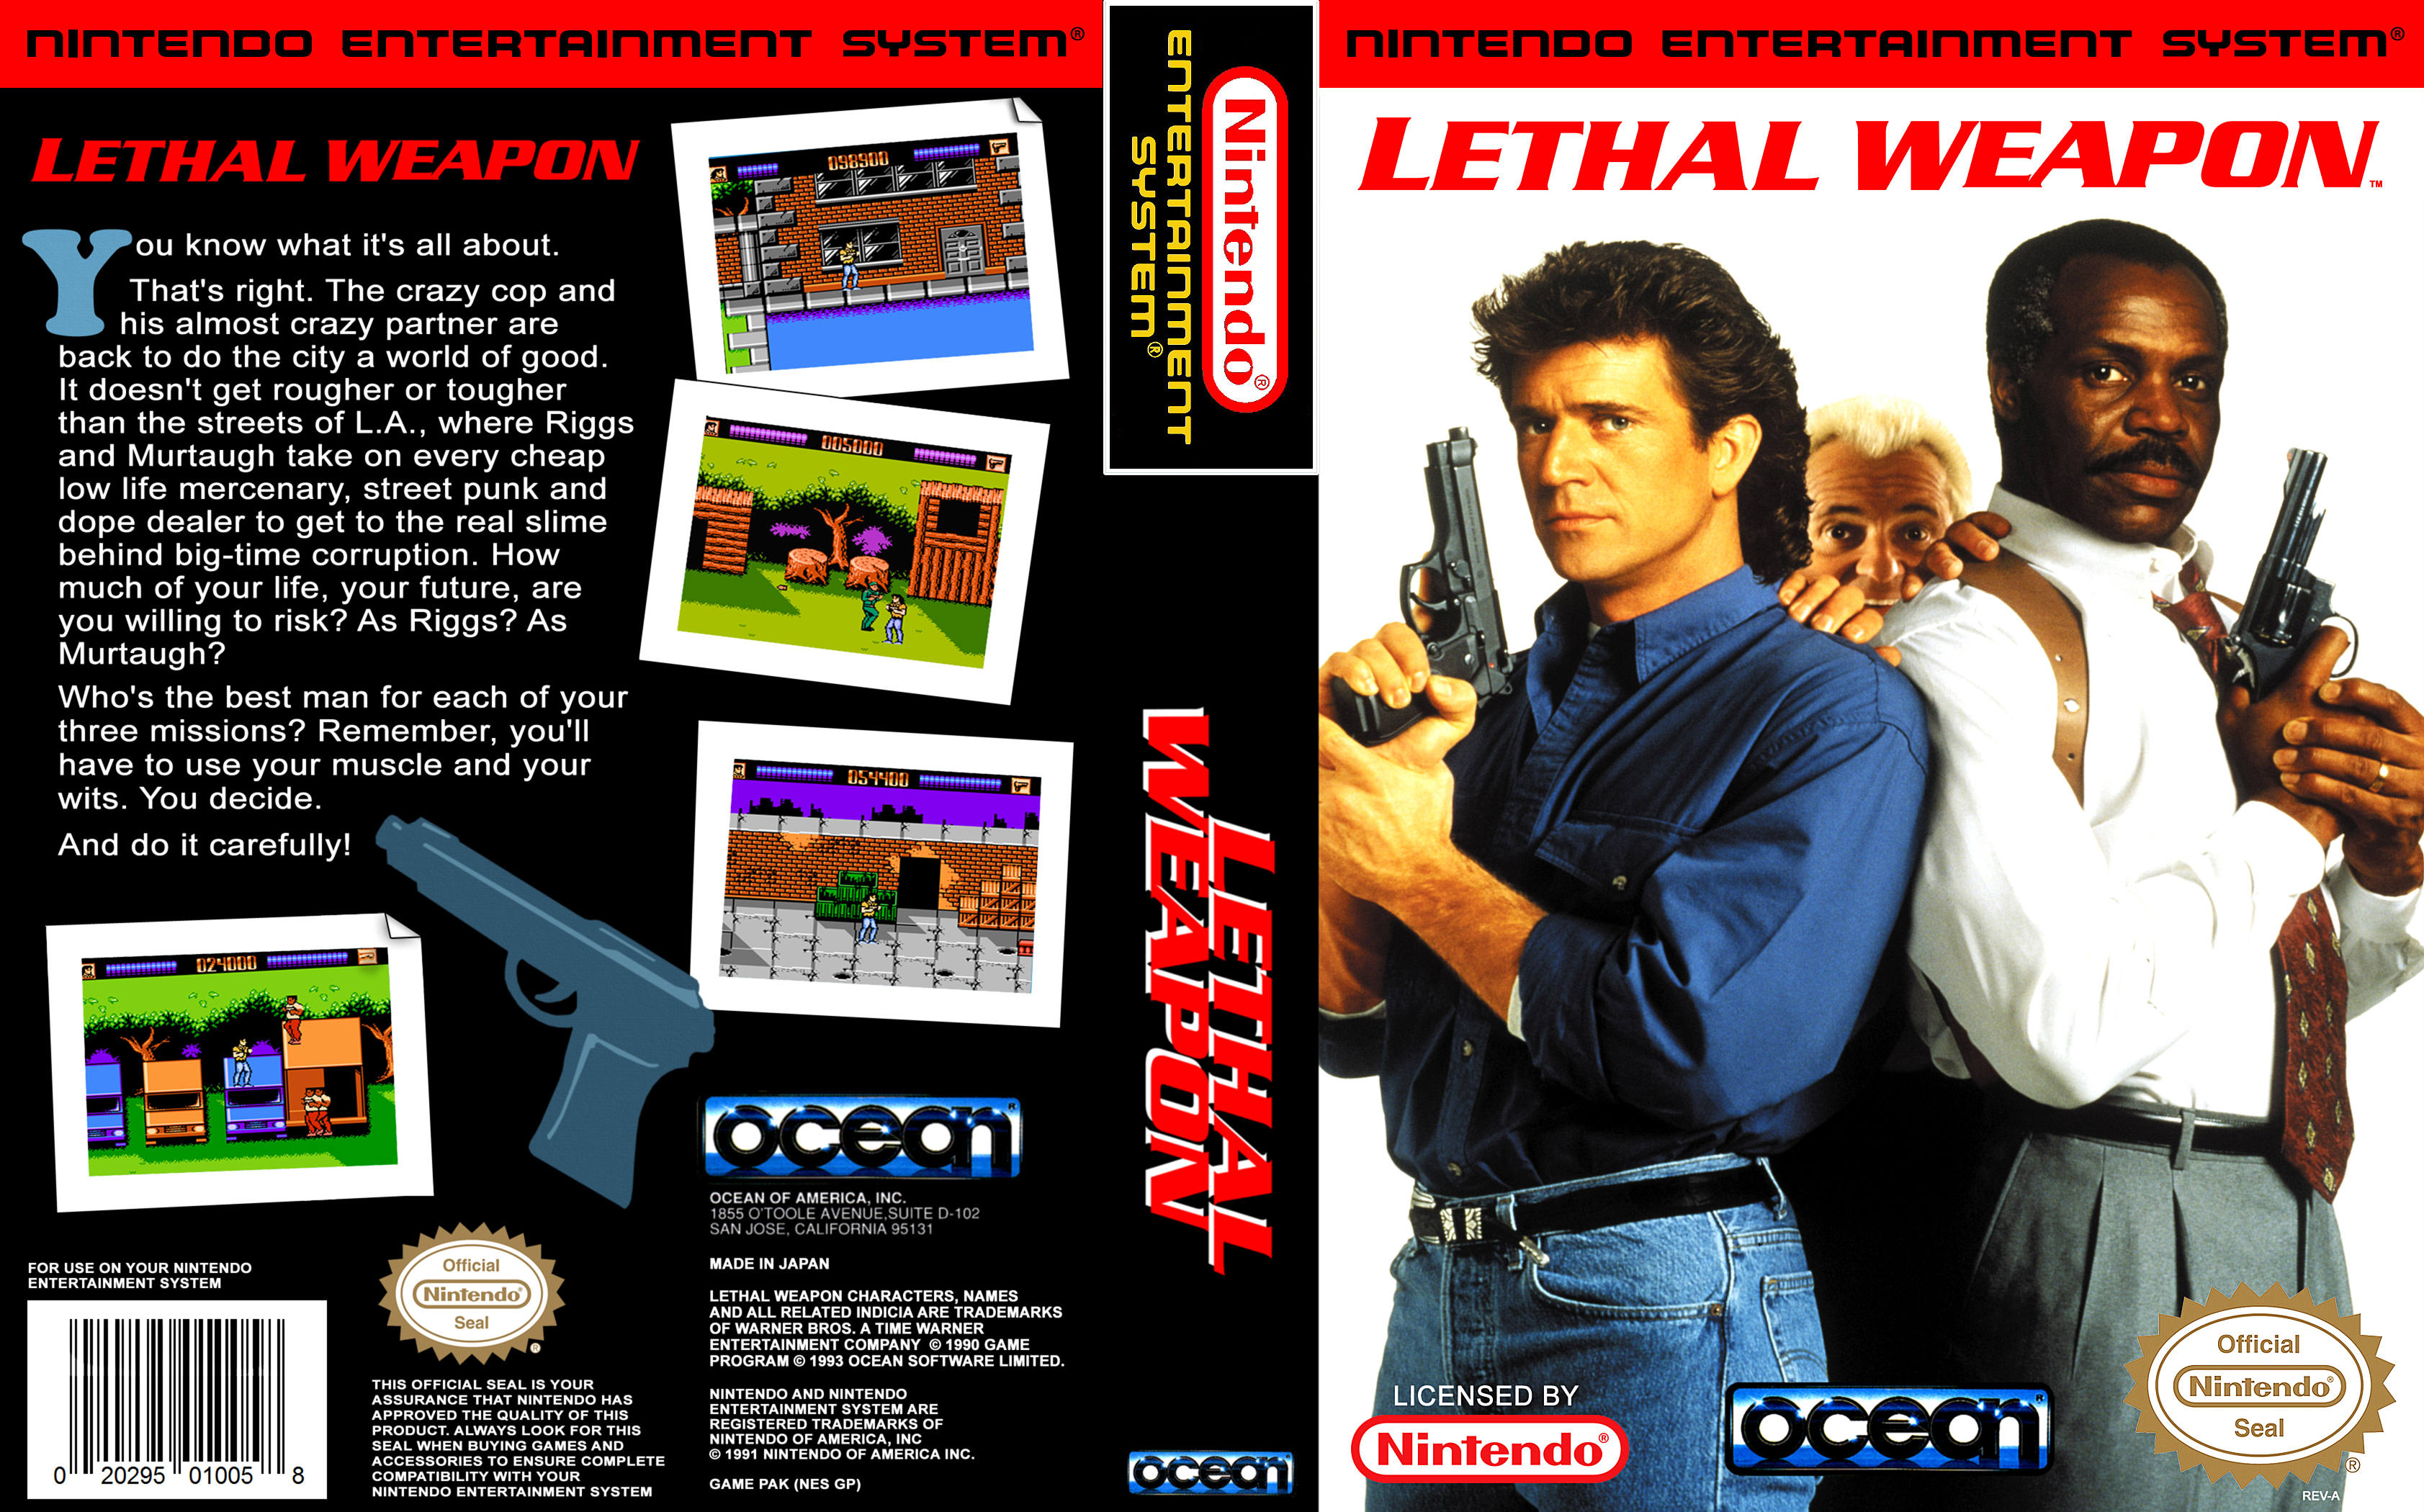 Lethal Weapon Денди. Lethal Weapon NES обложка. Dendy Lethal Weapon 2. Weapon игра Денди.. Booster lethal company